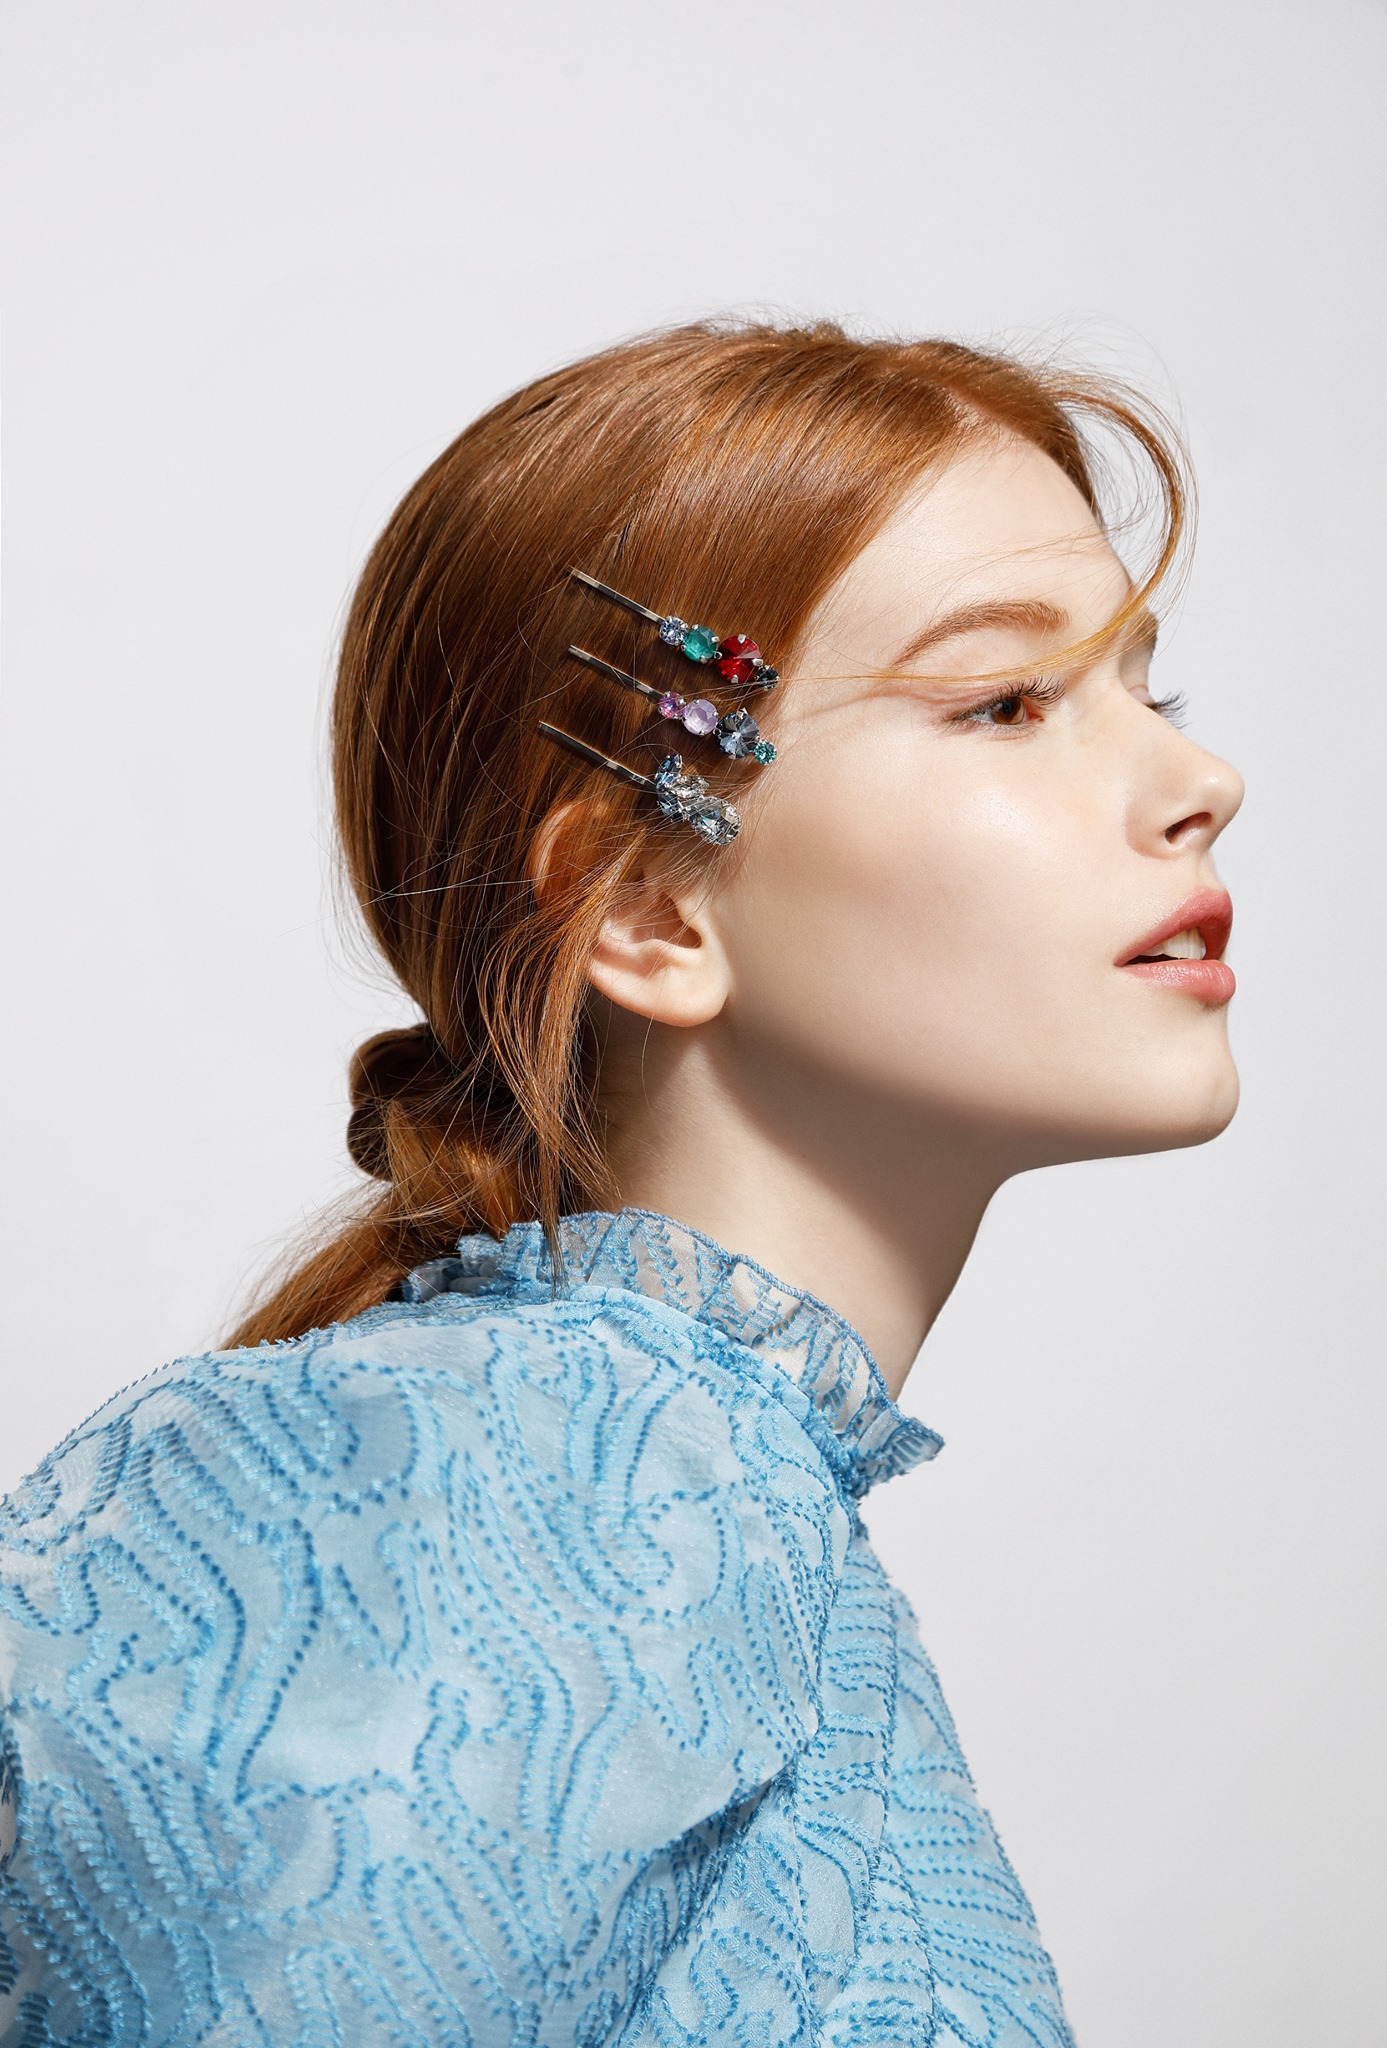 Each hair pin of Alexandre Zouari’s splendid jewellery slide collection is either dotted with Swarovski crystals in a mix of mesmerizing colours or with pearly touches. We would suggest the styling of three pins as the magic number! 無論日與夜，戴上光采流瀉的彩色水晶髮飾，是輕易打造貴氣造型的小秘訣。特別推薦Alexandre Zouari的三色水晶及珍珠迷你髮夾，瑰麗的施華洛世奇水晶/珍珠配搭令人目眩神迷。提提你，最時尚的配搭方式是X3的造型，快來感受一下3的魔法吧。 For any updates of AZ:...